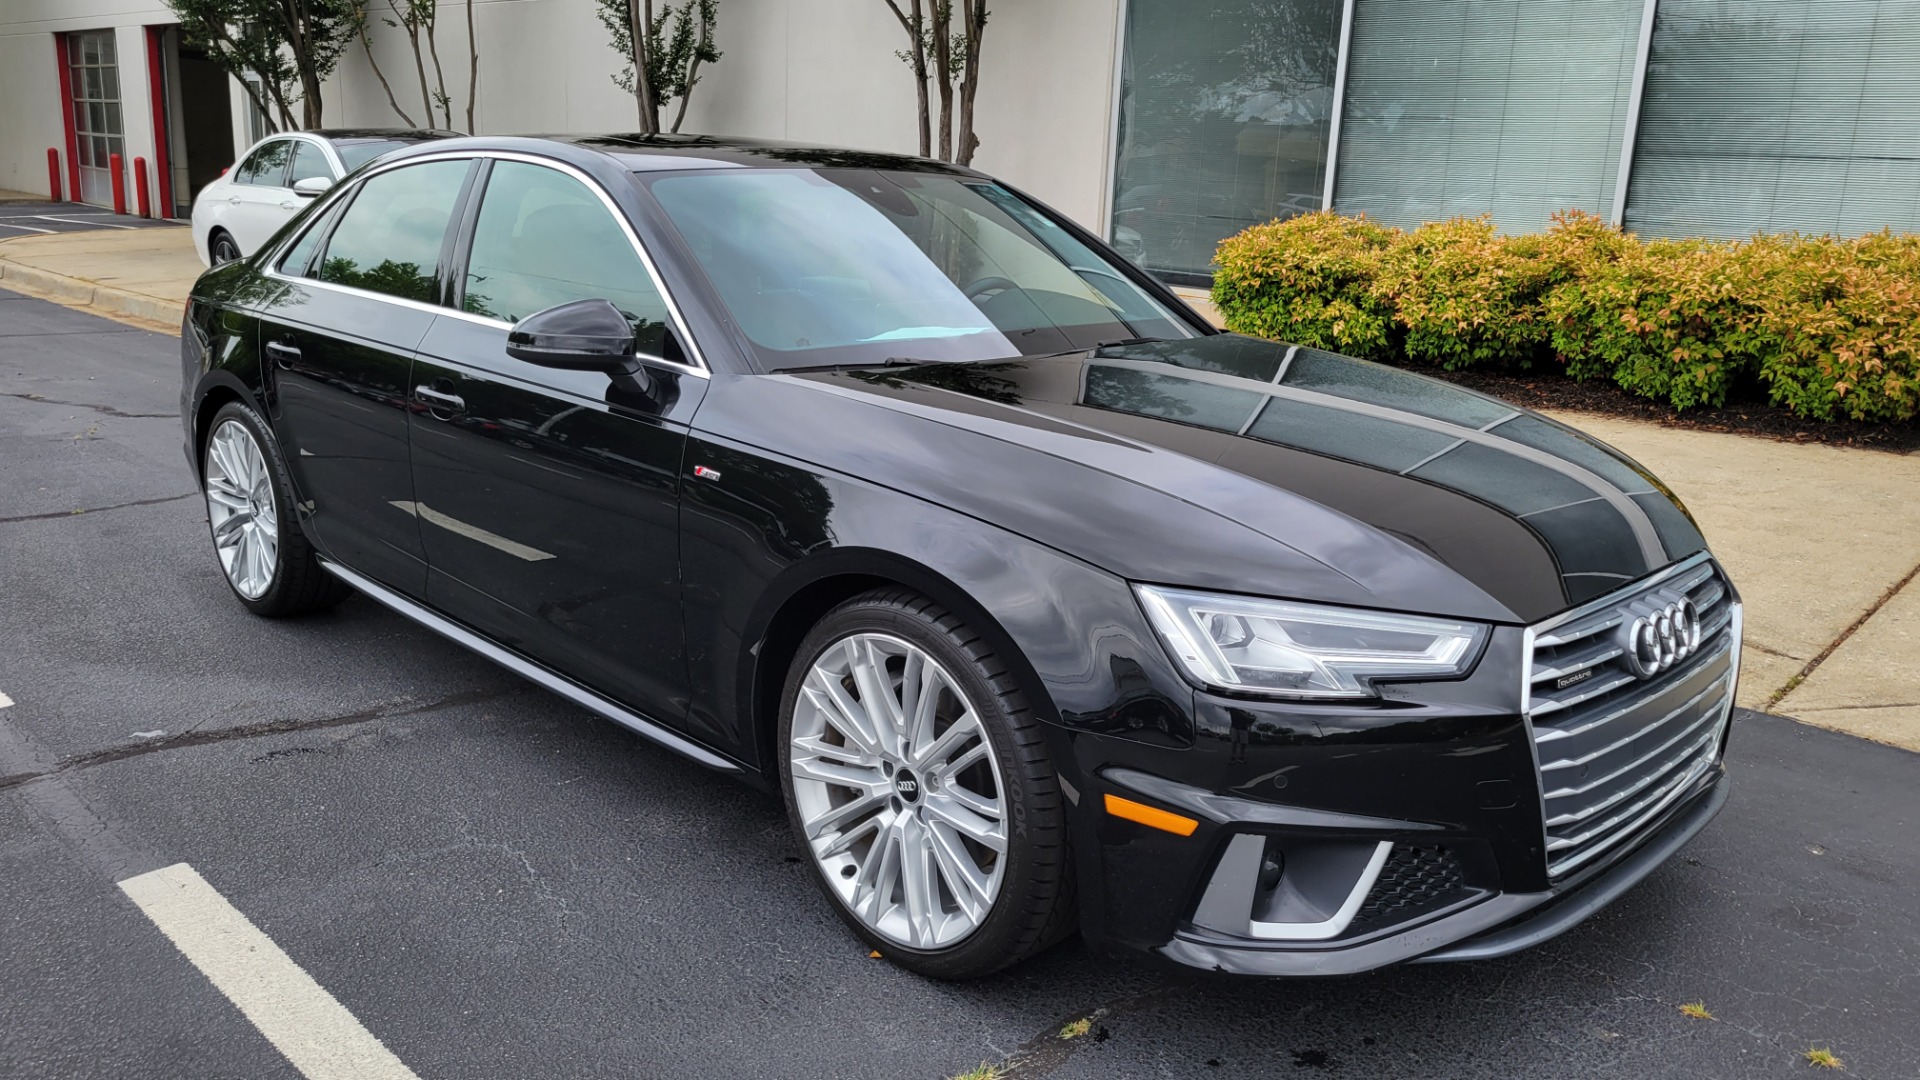 Used 2019 Audi A4 PREMIUM PLUS QUATTRO / SPORT / NAV / SUNROOF / REARVIEW for sale $37,495 at Formula Imports in Charlotte NC 28227 8